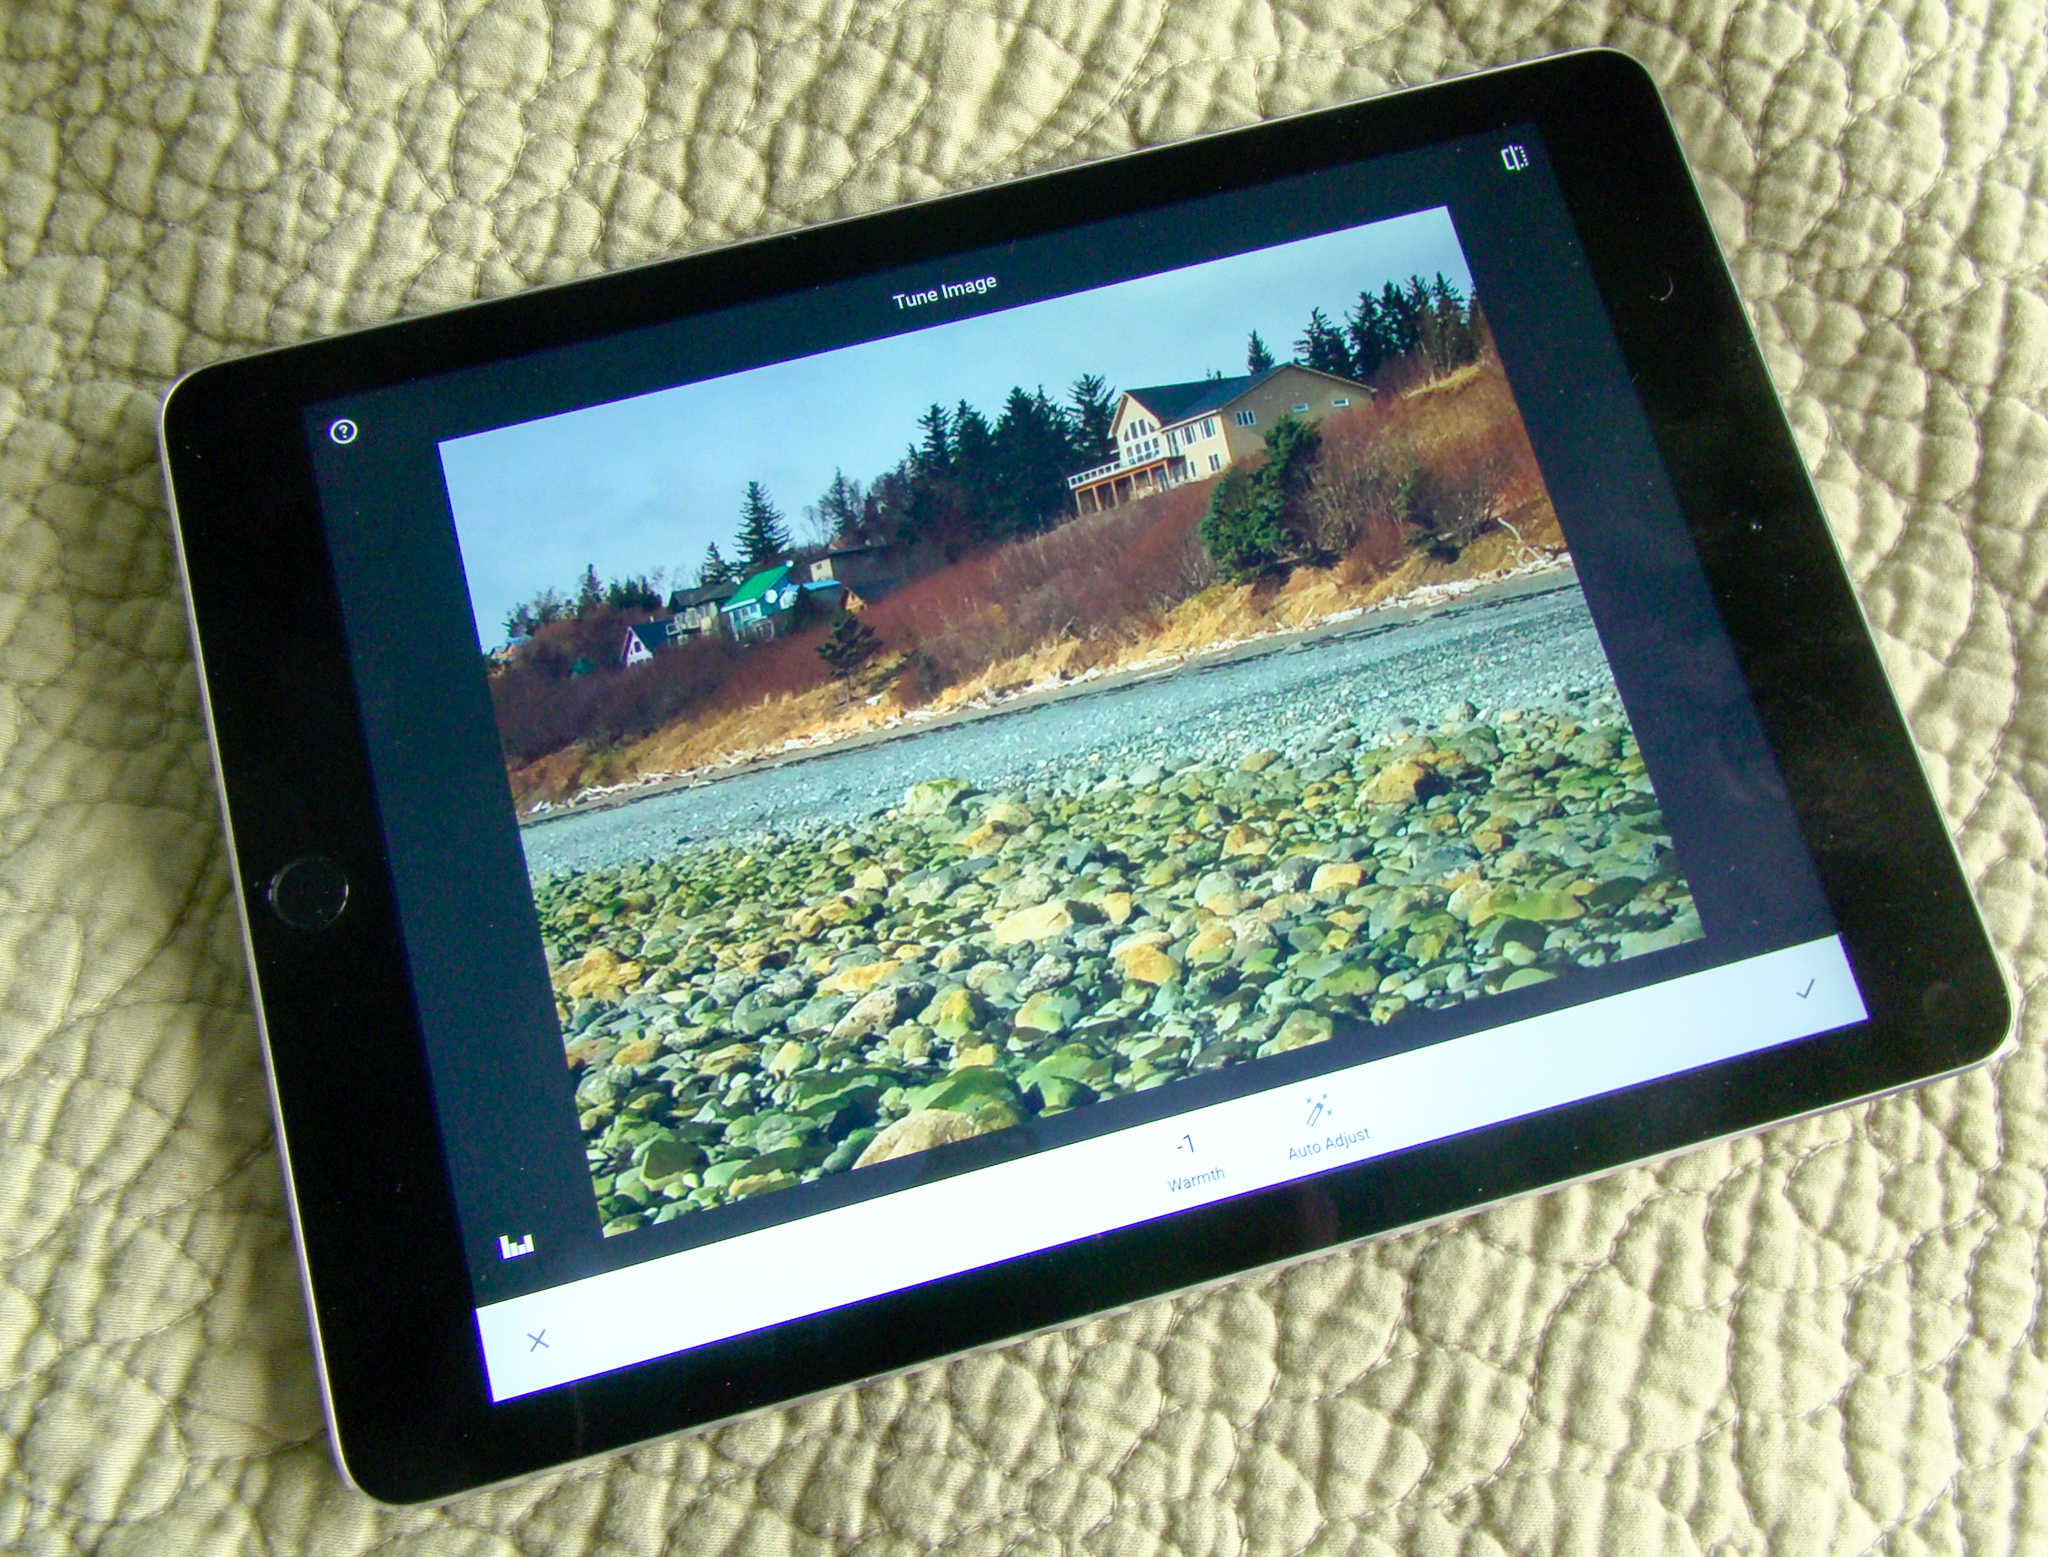 Snapseed lets you tune up your photos with ease.